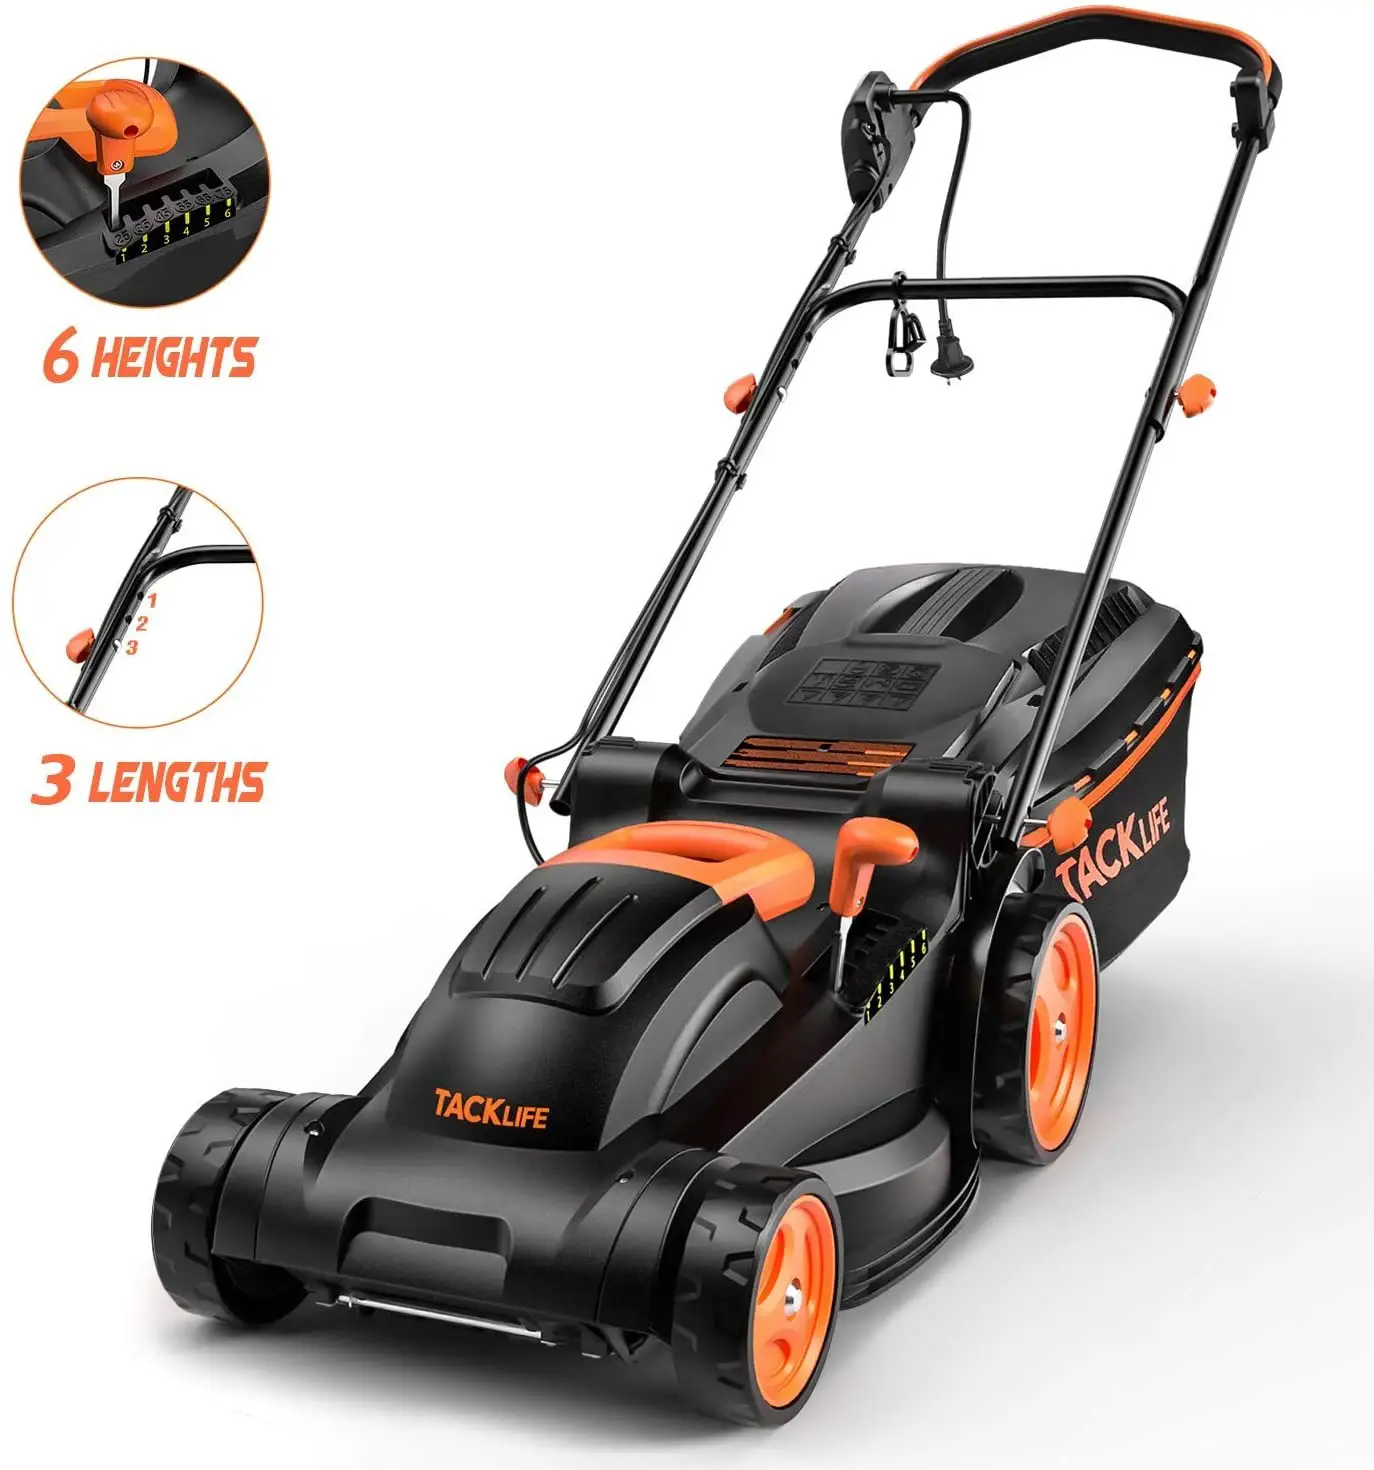 Top 7 Best corded electric lawn mower Of 2020